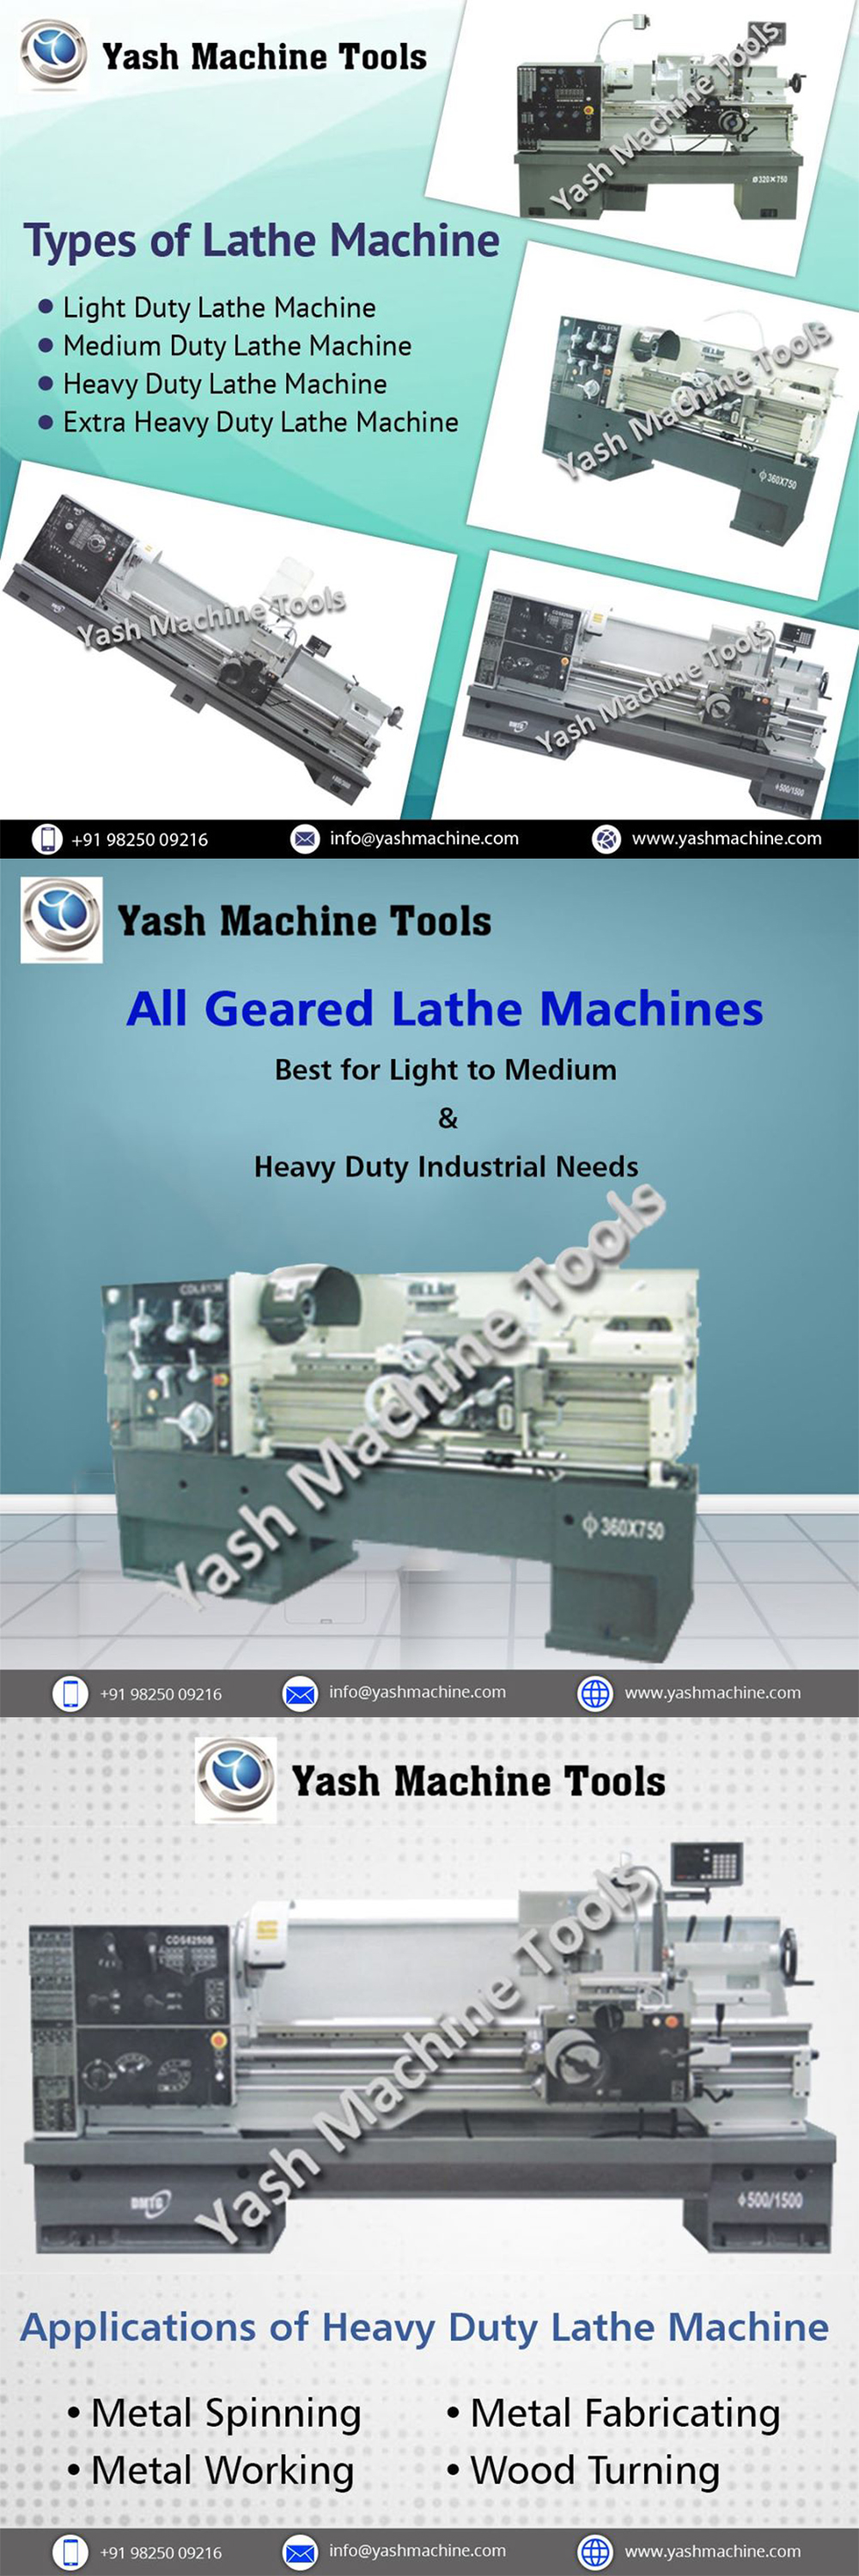 Heavy Duty Lathe Machines for Different Industries